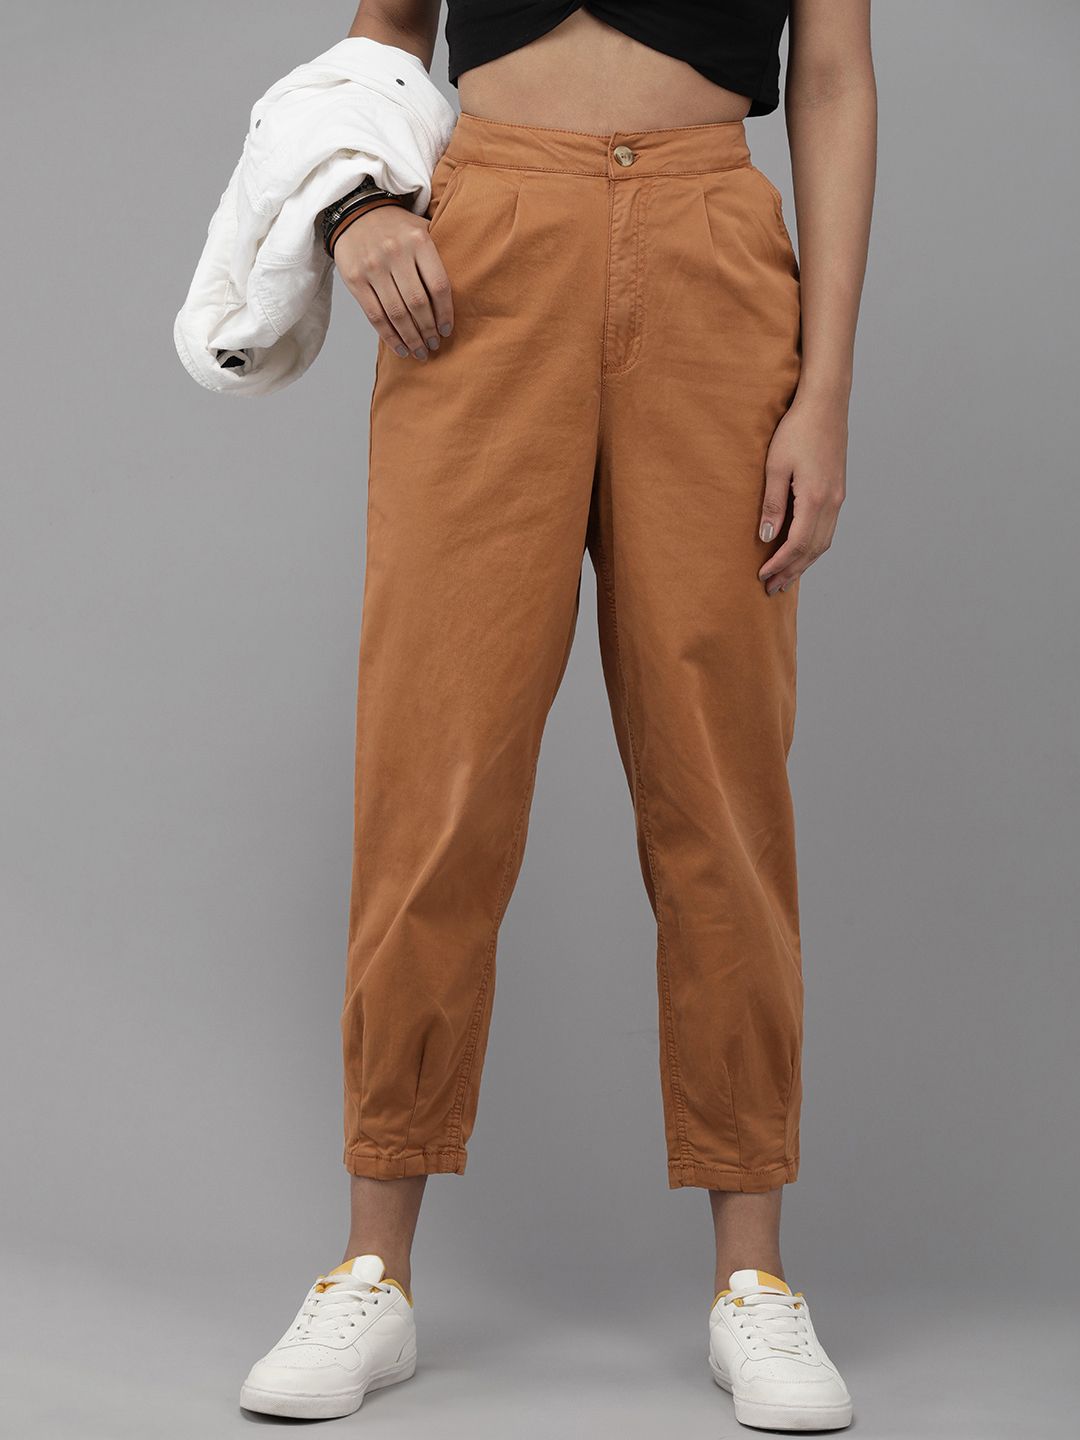 The Roadster Lifestyle Co. Women Cropped Trousers Price in India